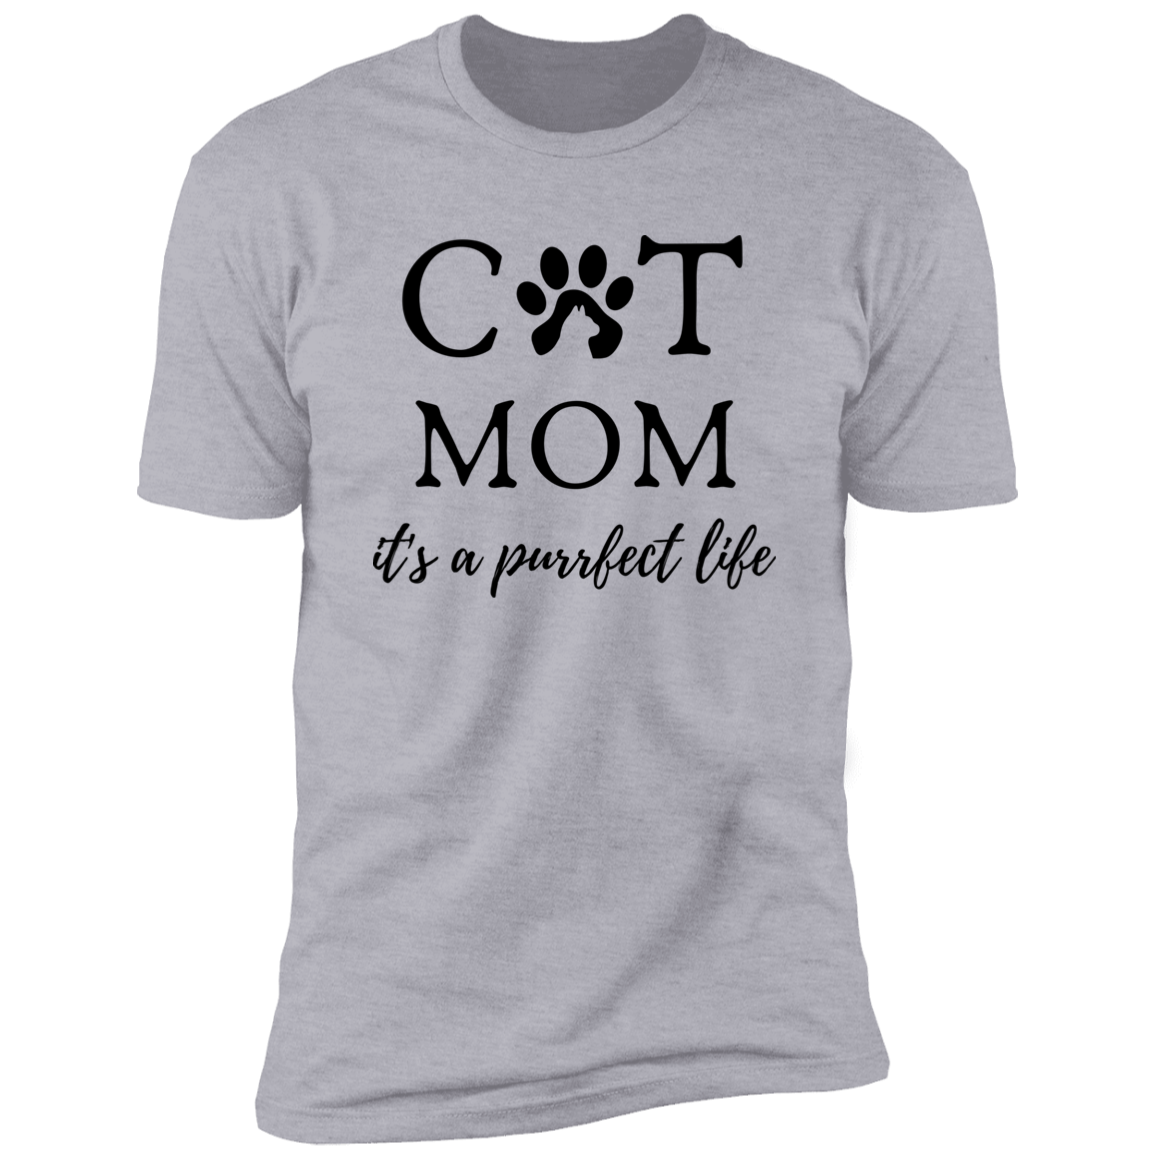 Cat Mom It's a Purrfect Life T-shirt, Cat Mom Shirt for humans, in light heather gray